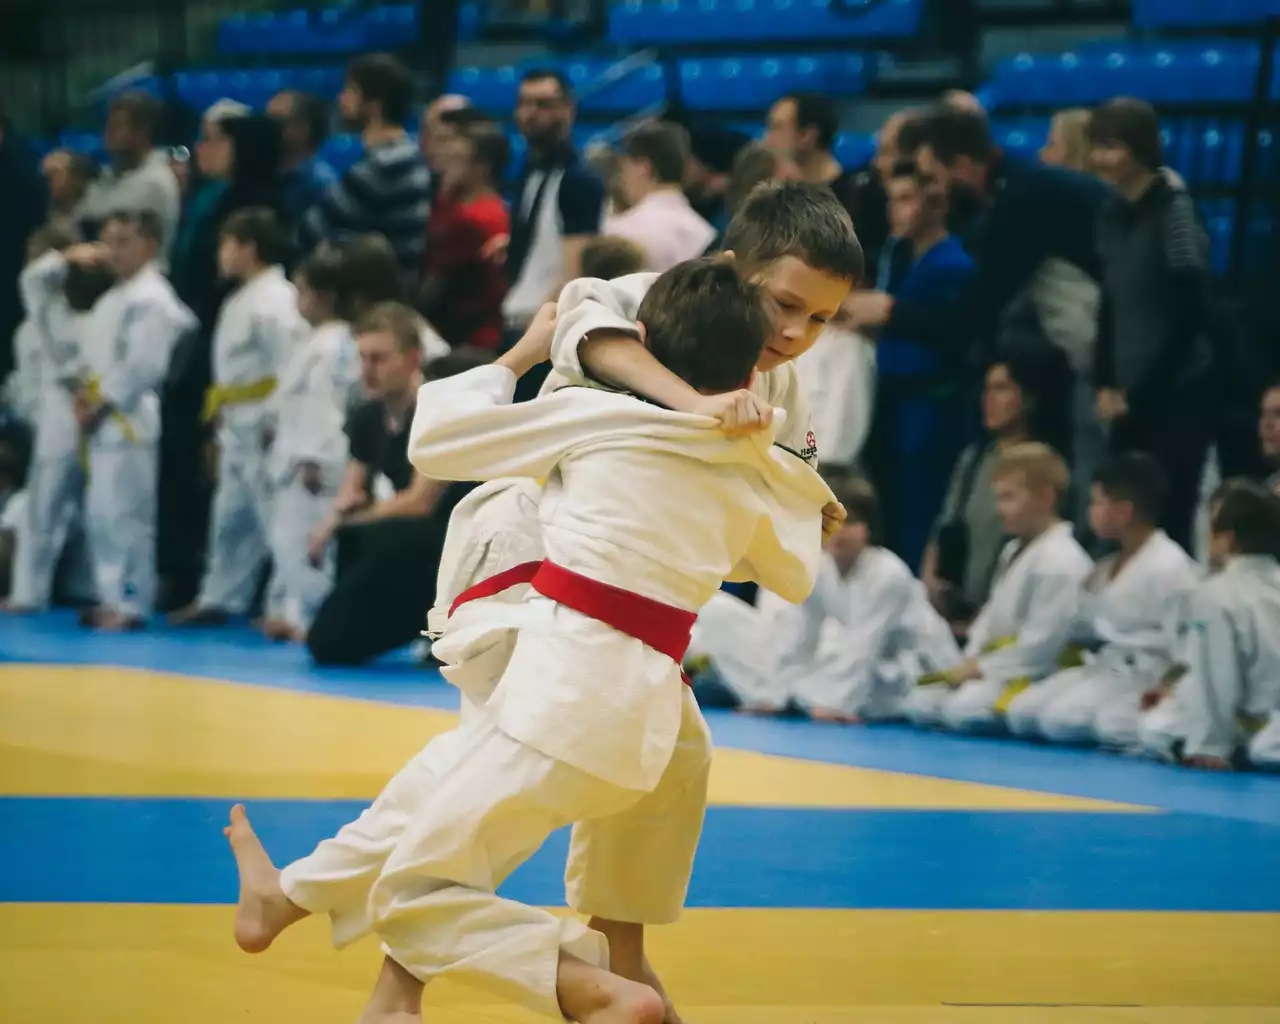 Ground Techniques: How to Improve Your Ground Techniques in Judo